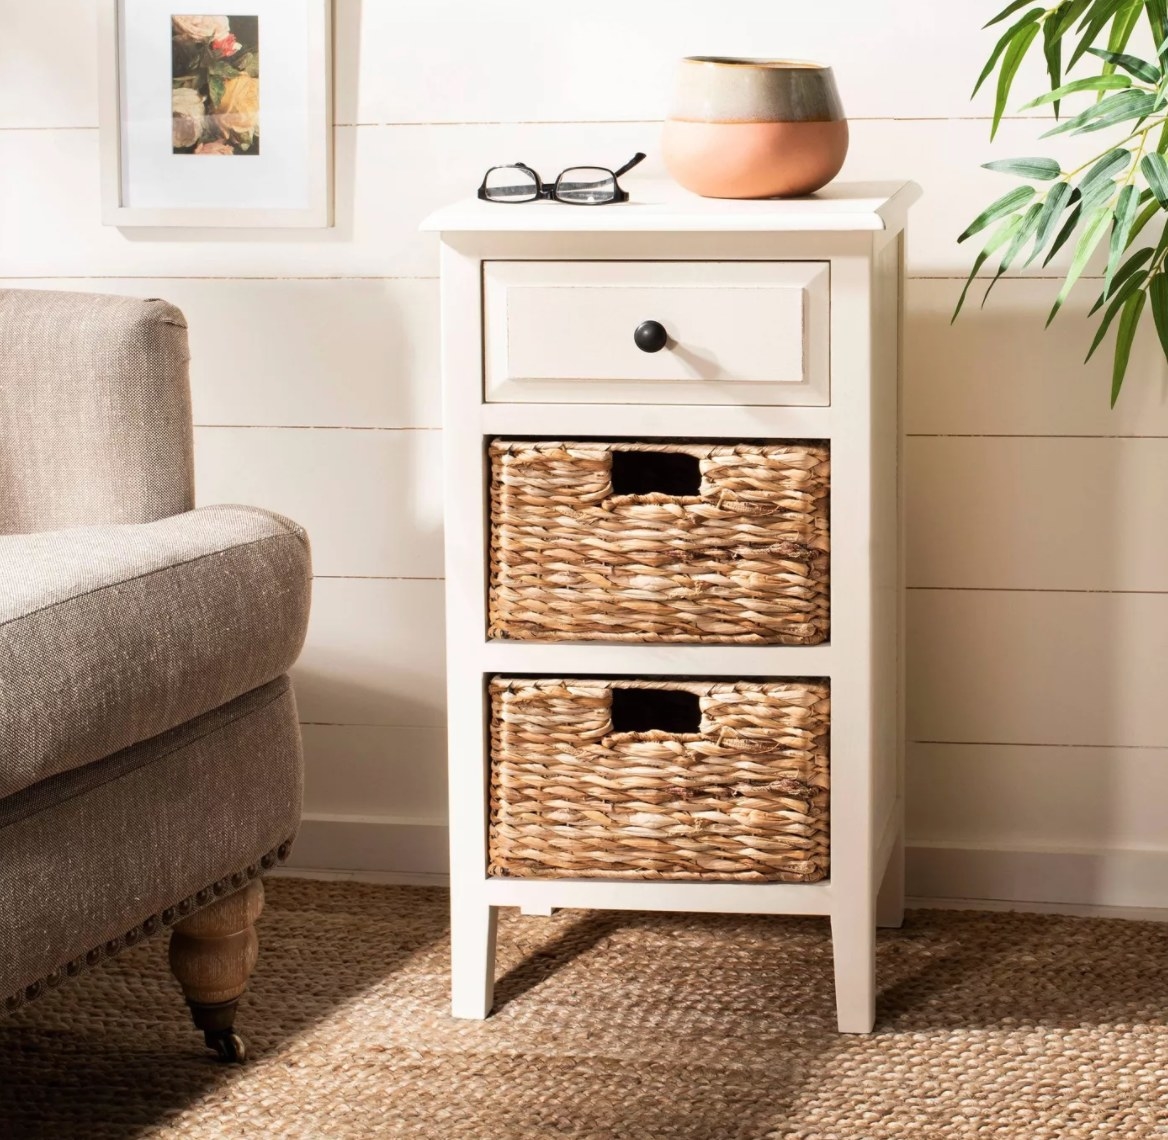 The side table with drawers